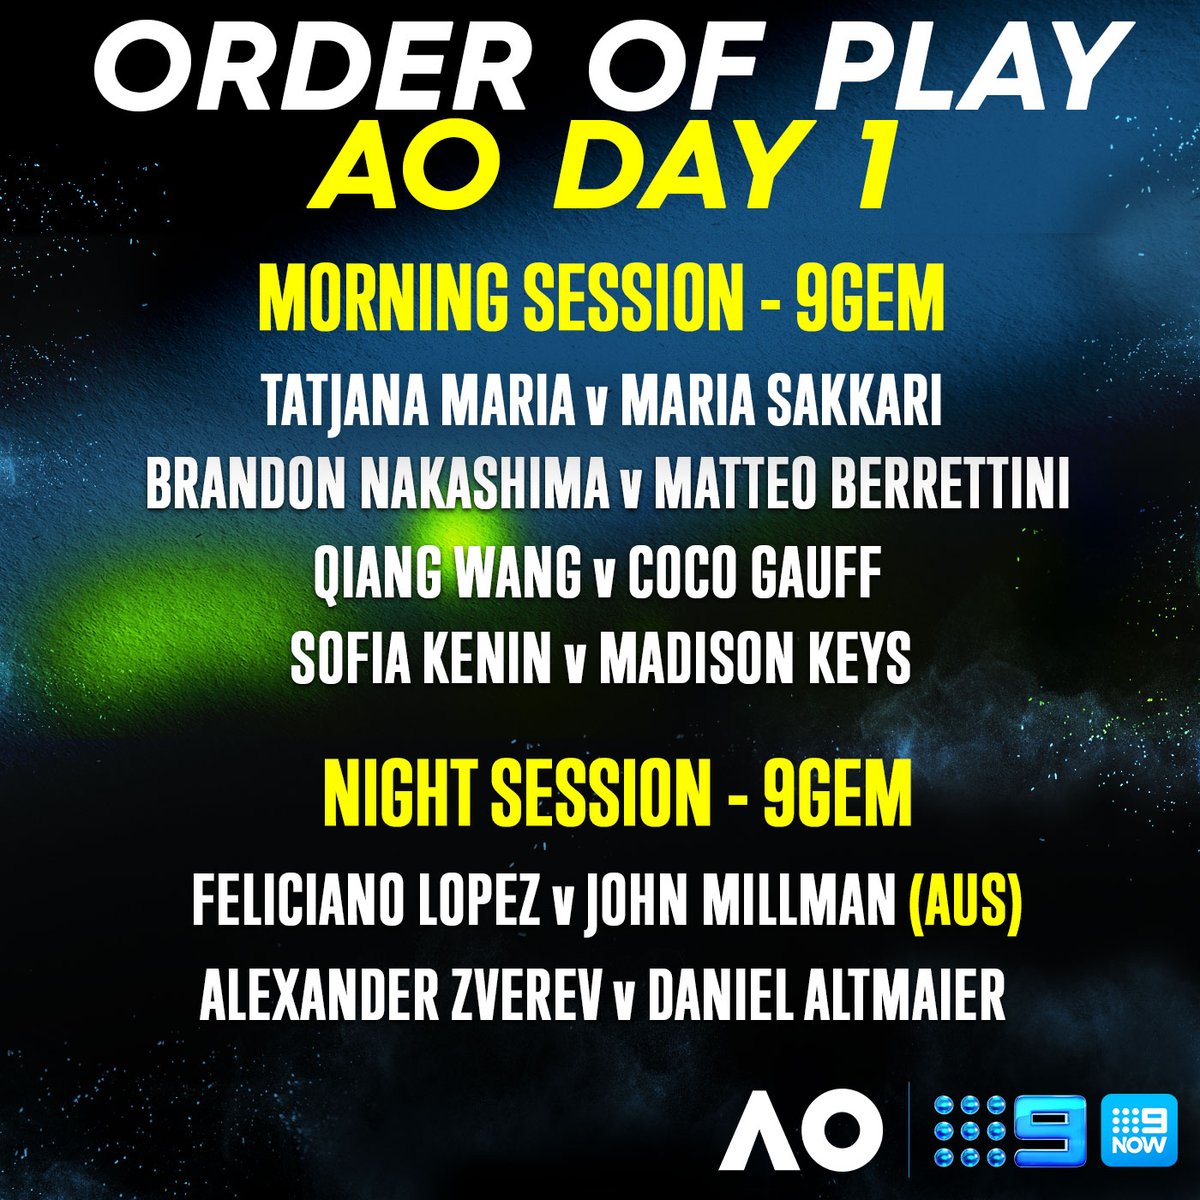 IT'S FINALLY HERE! A feast of tennis across 9Gem and 9Now today! 🎾 #AusOpen - Live on 9Gem and 9Now